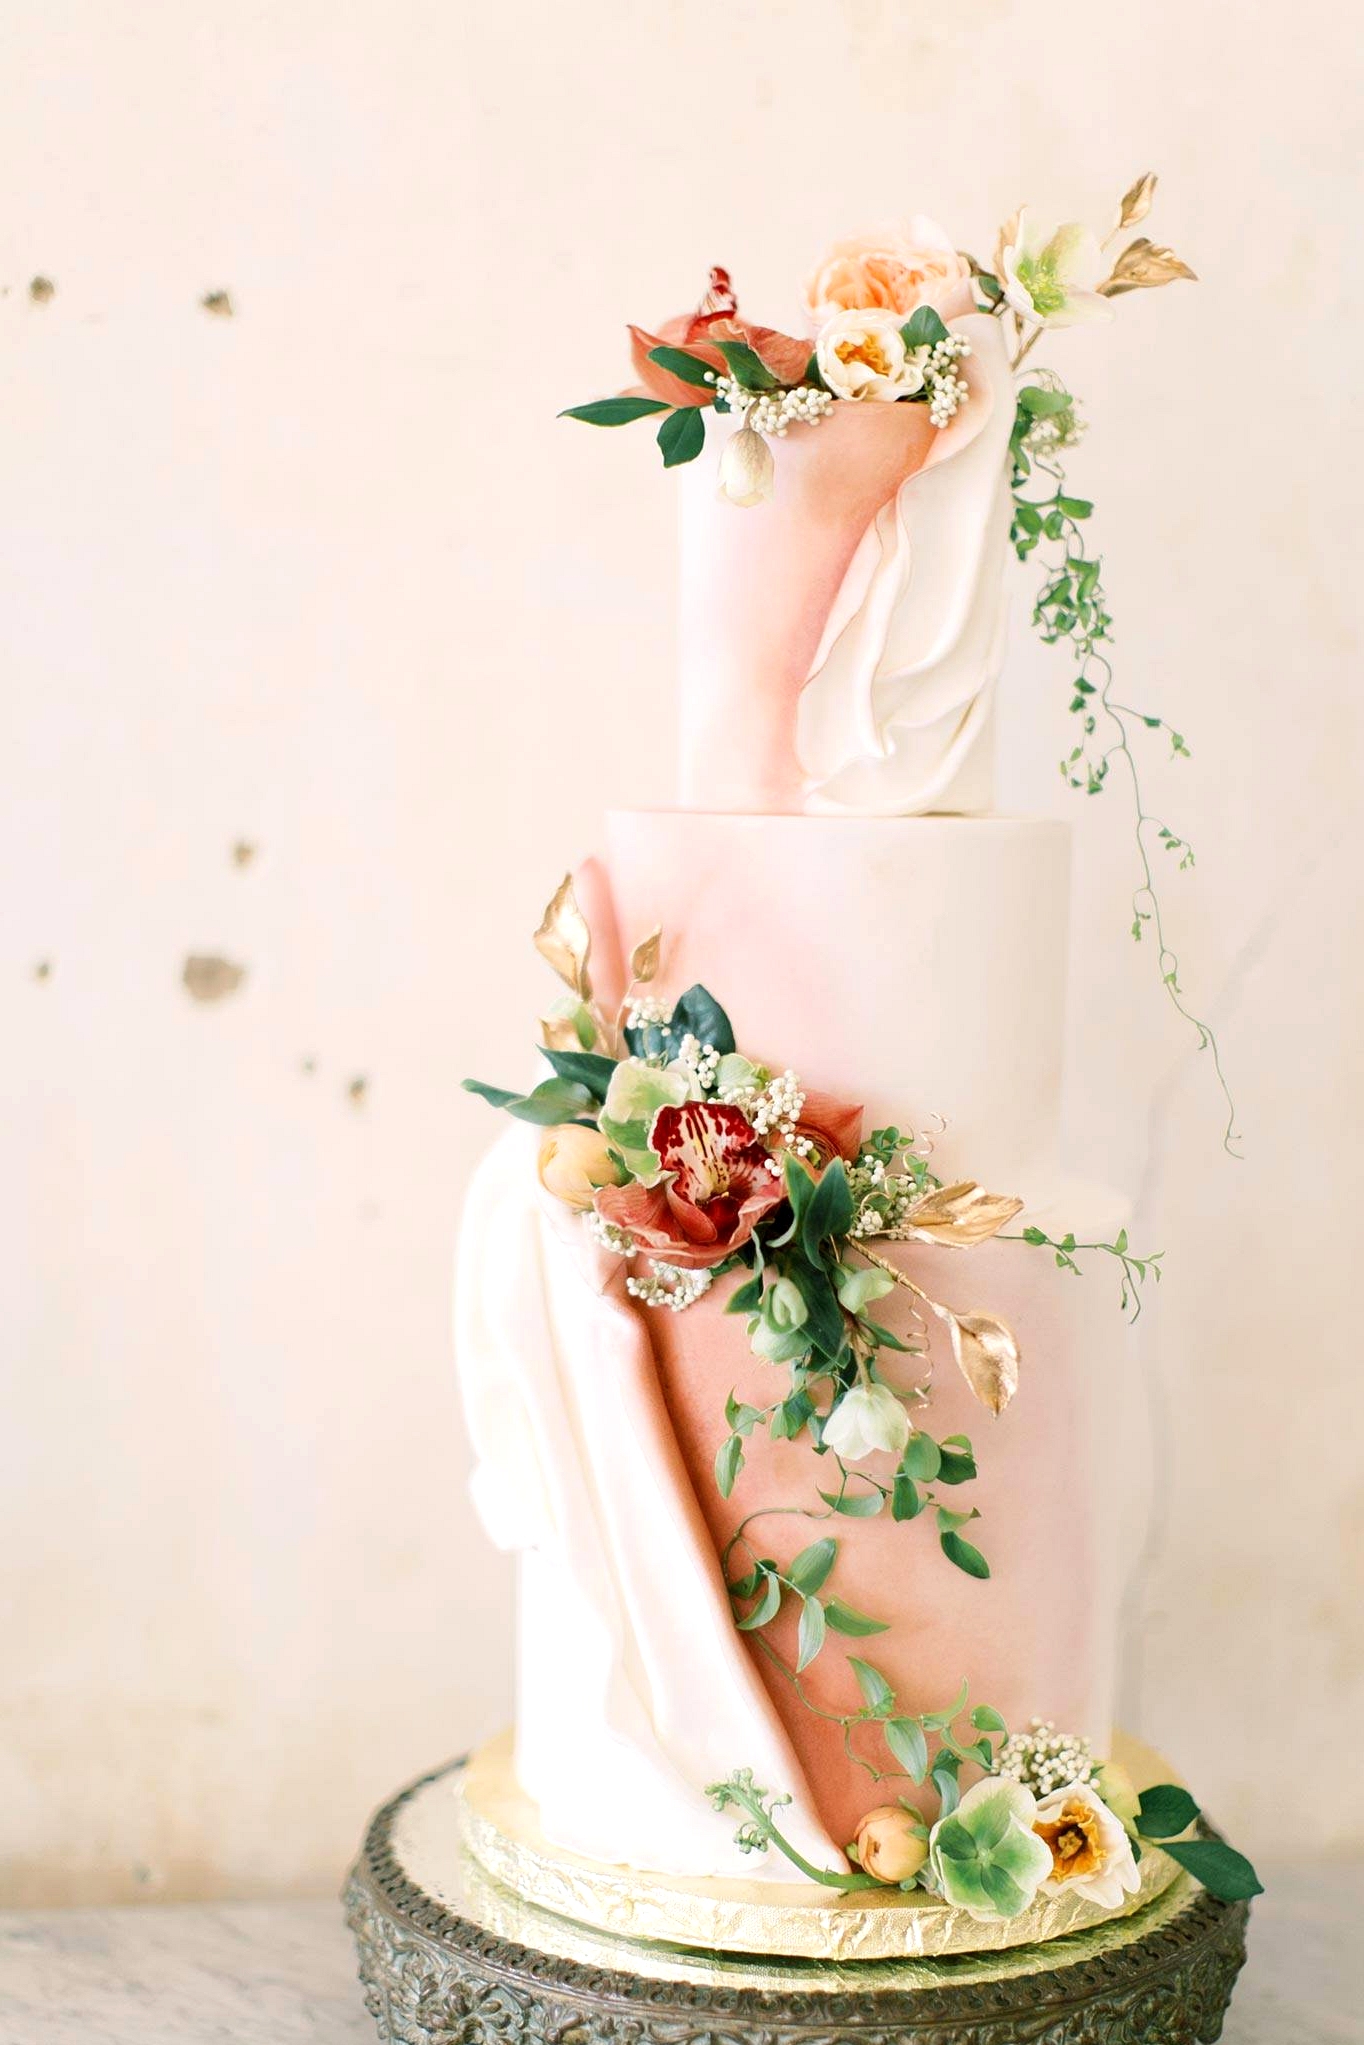 draped fondant wedding cake with pink and white colors and fresh trailing flowers